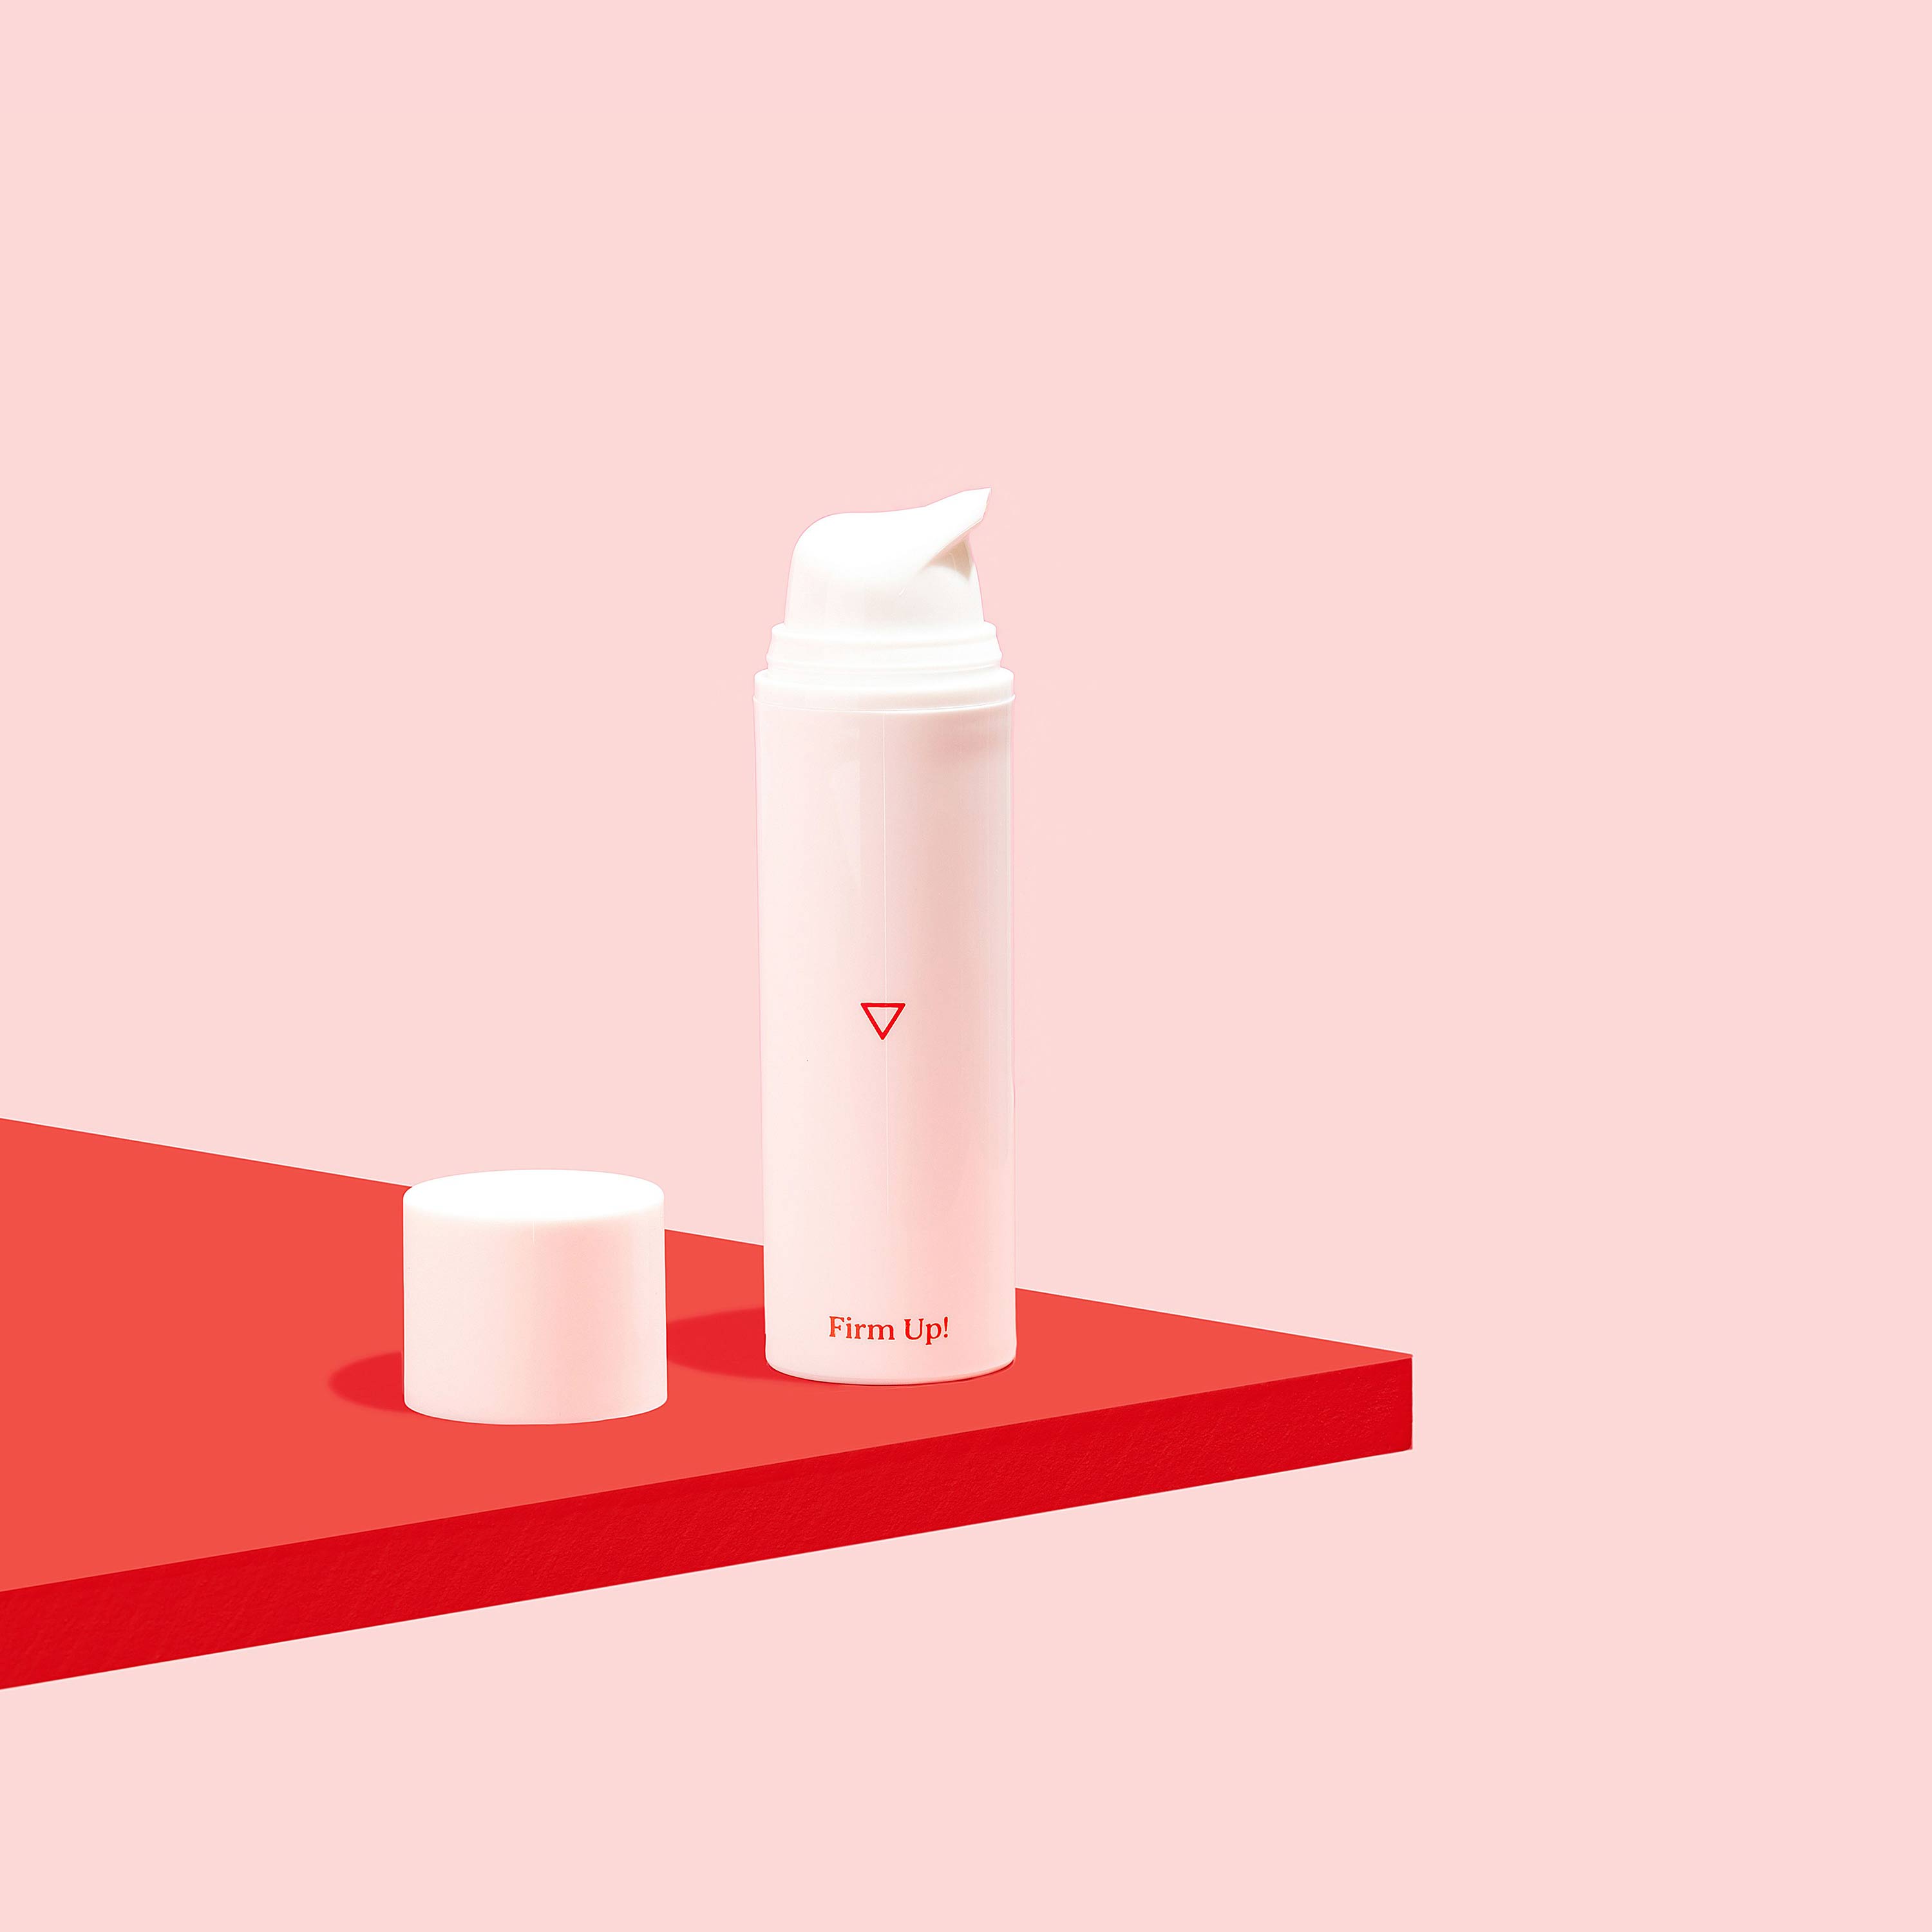 Firm Up! Wrinkle Firming Cream on a red surface, on a pink background